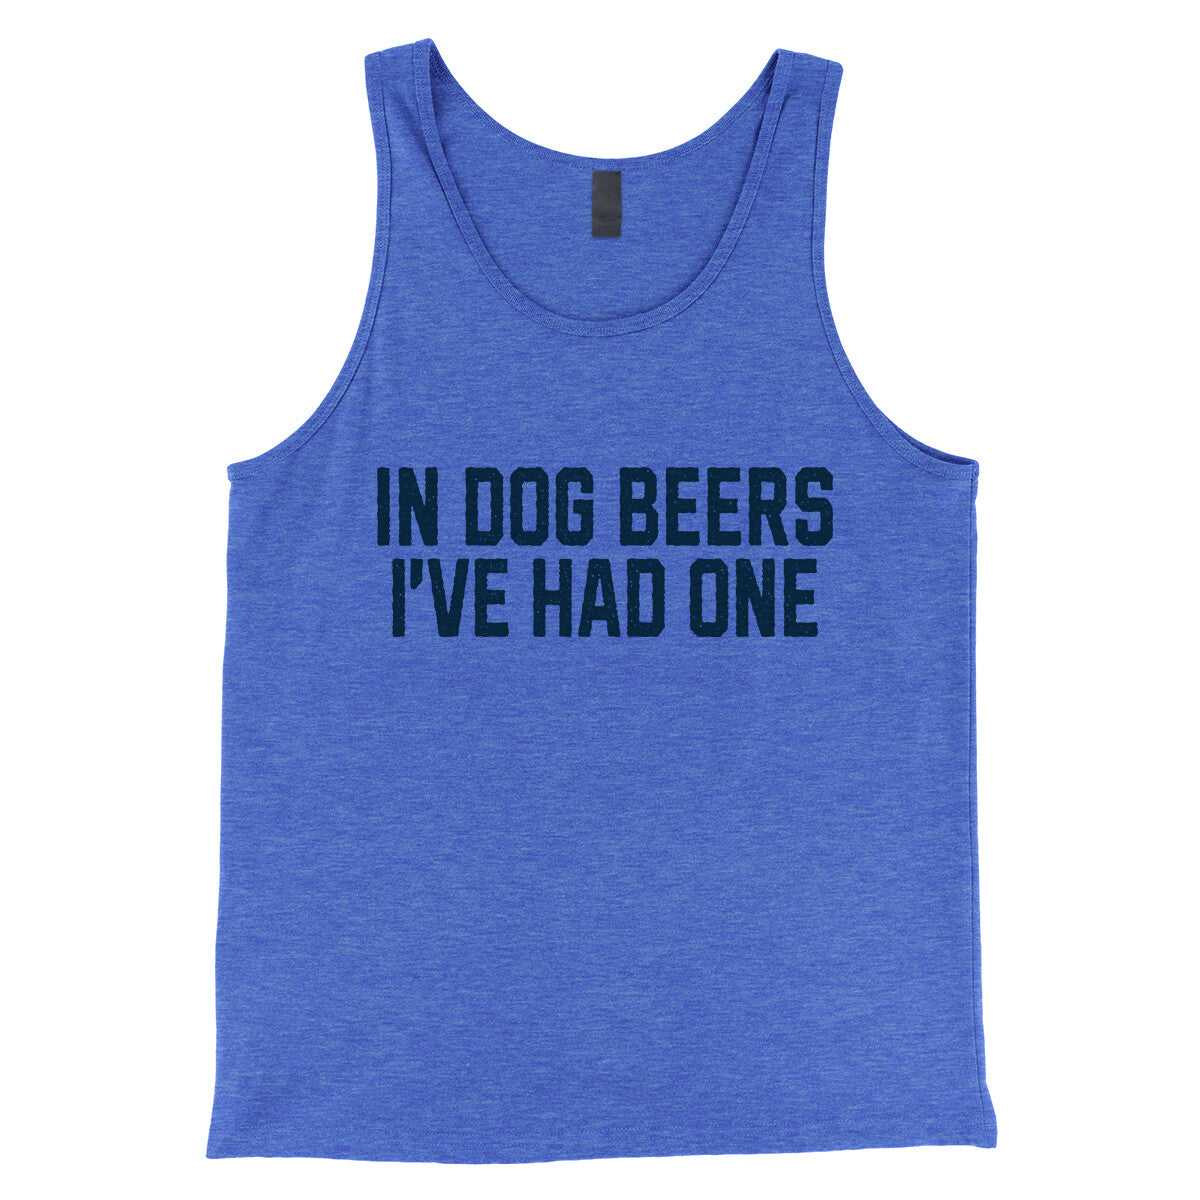 In Dog Beers I've Had One in True Royal TriBlend Color